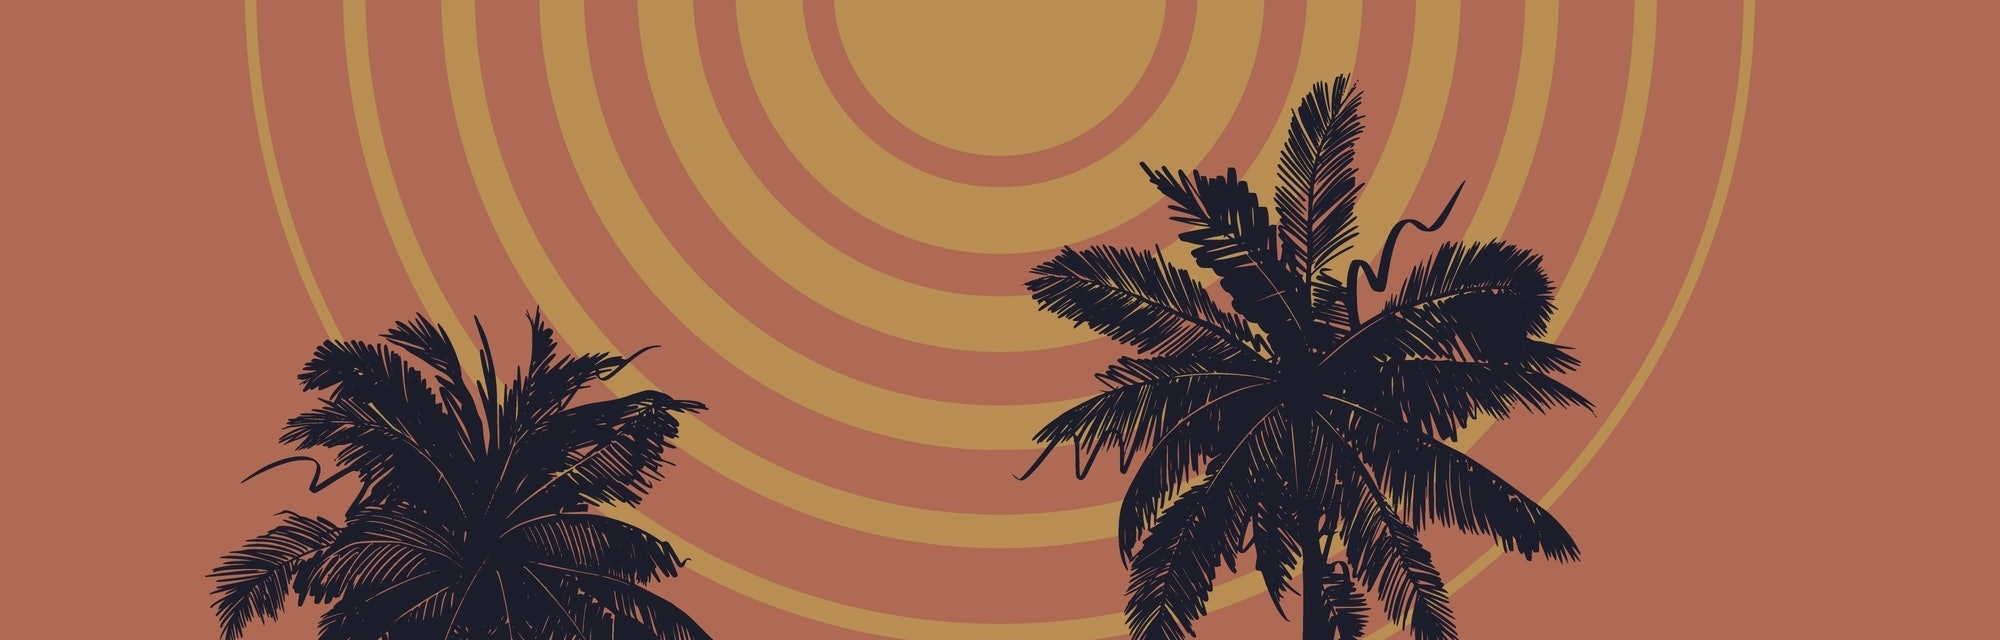 Vintage tropical poster in boho warm colors. Geometric abstract sun and sketchy palm trees silhouett...